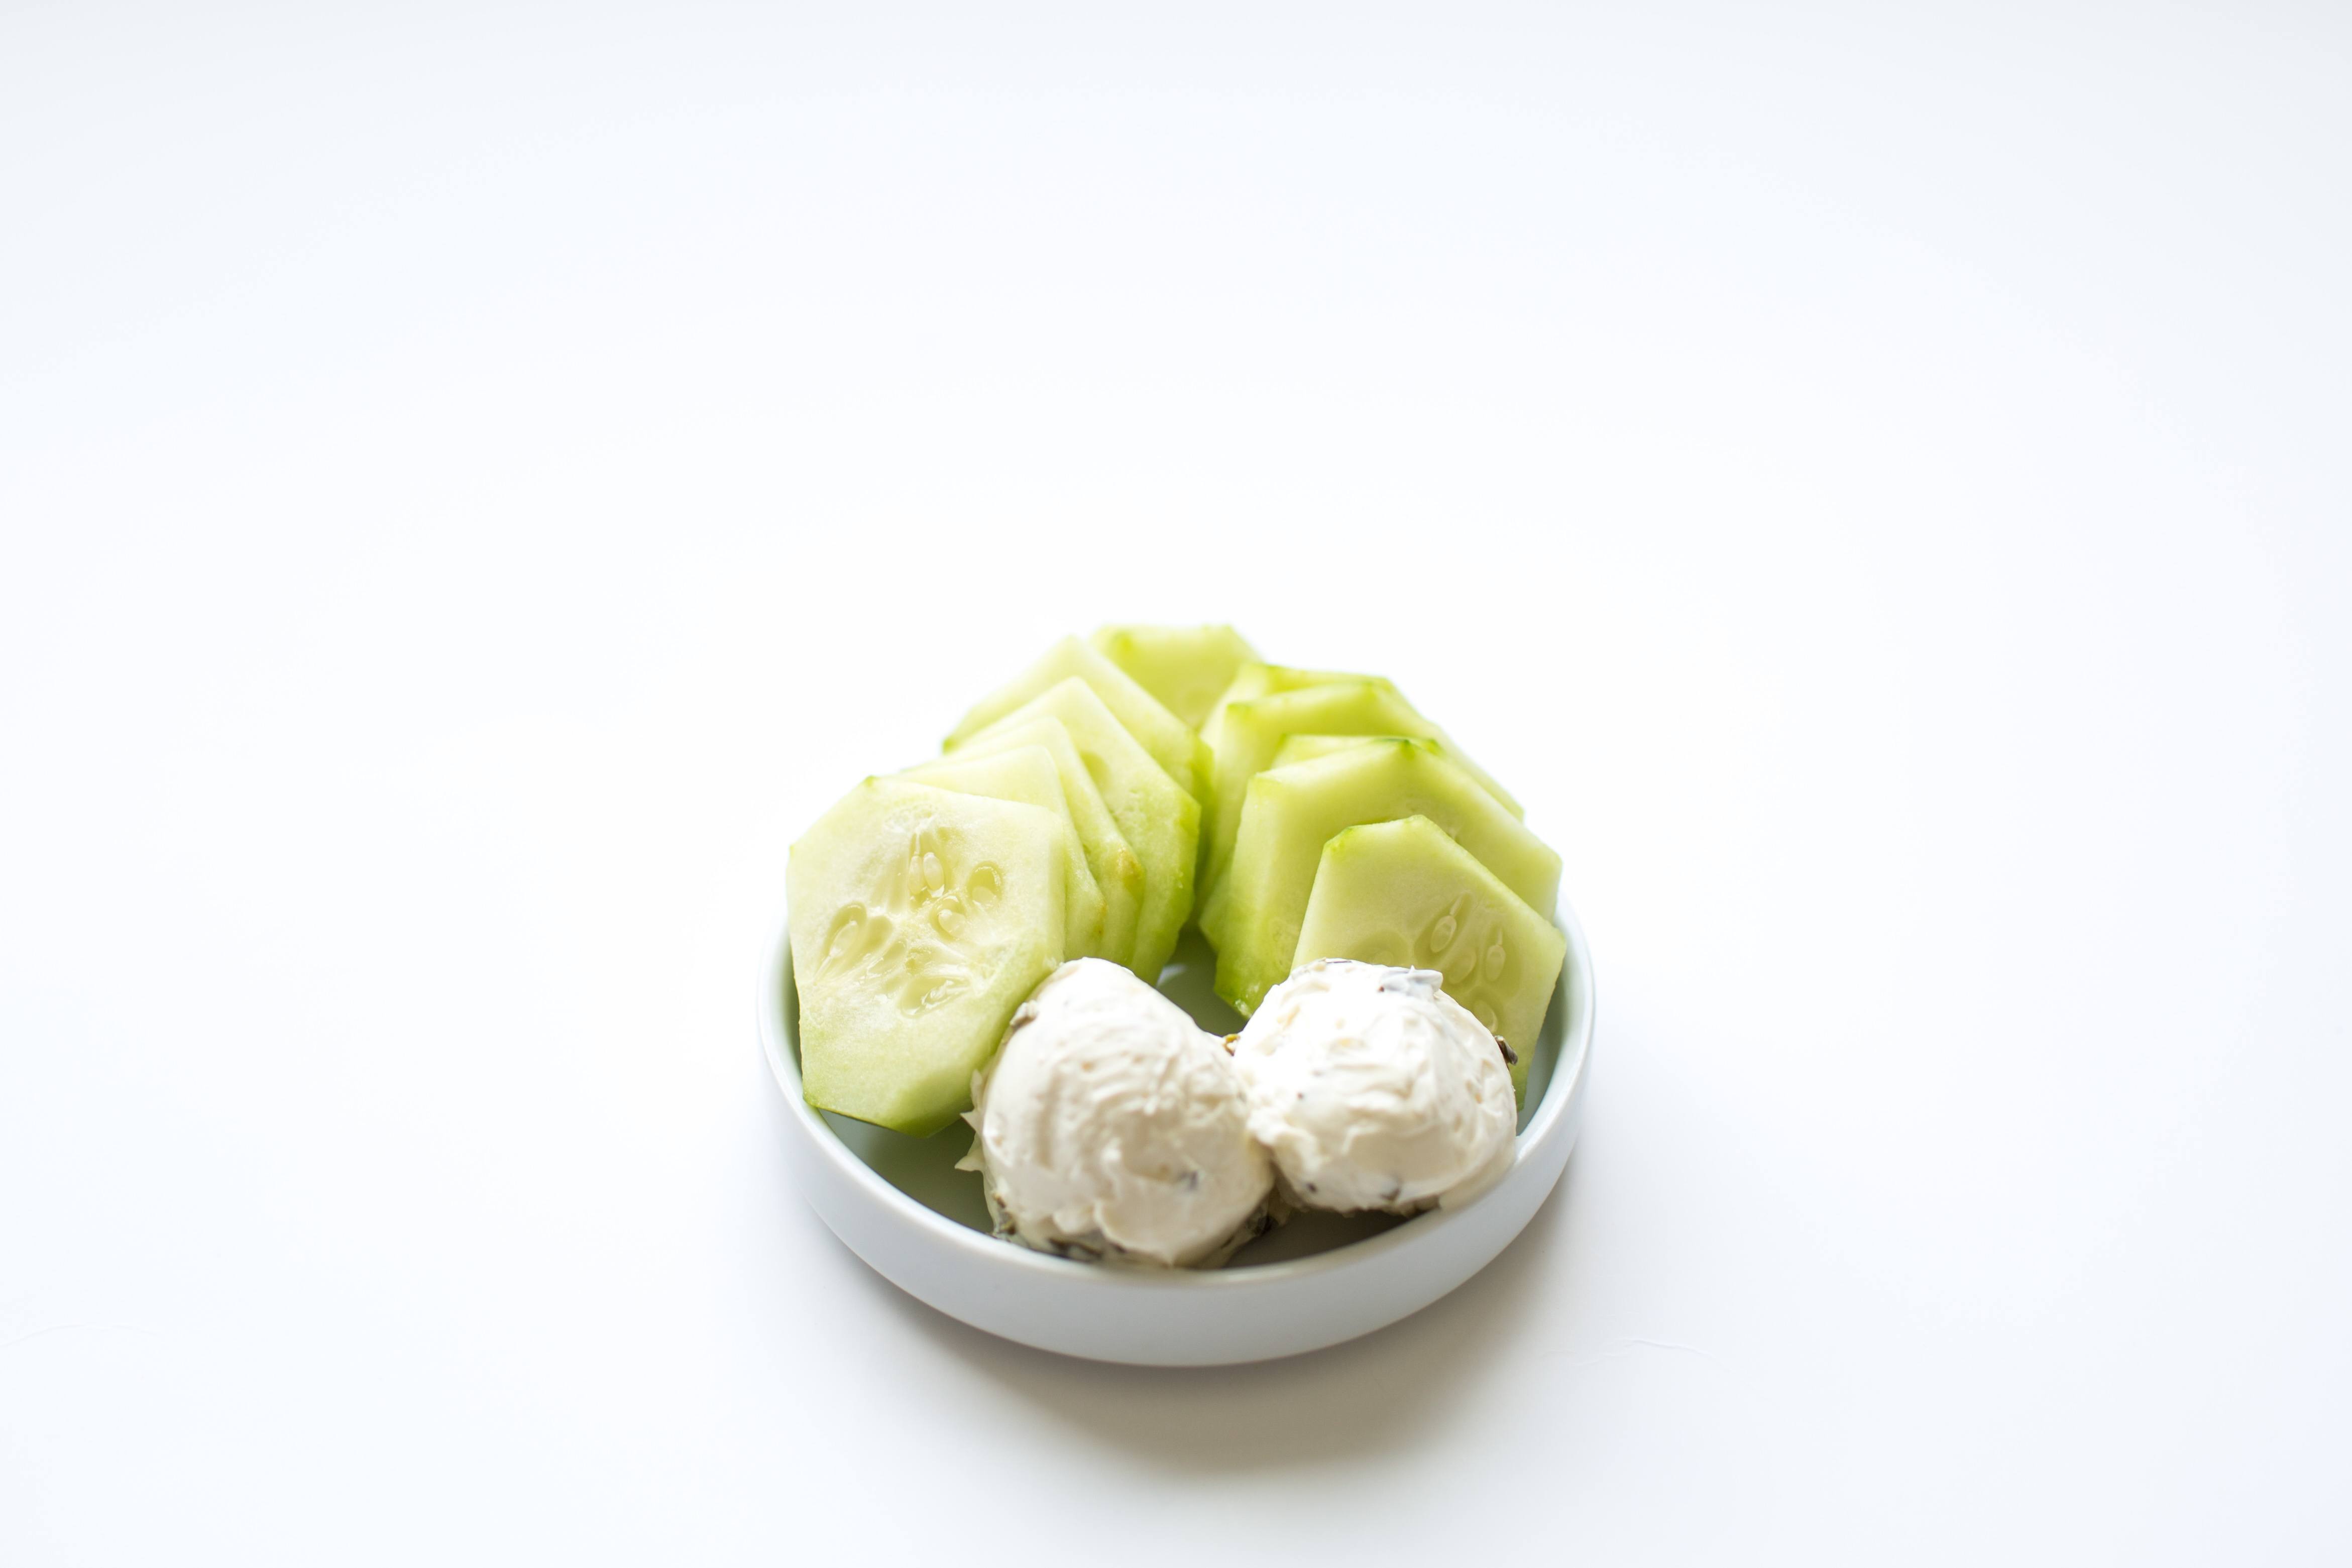 100 calorie snack cucumber and vegetable cream cheese